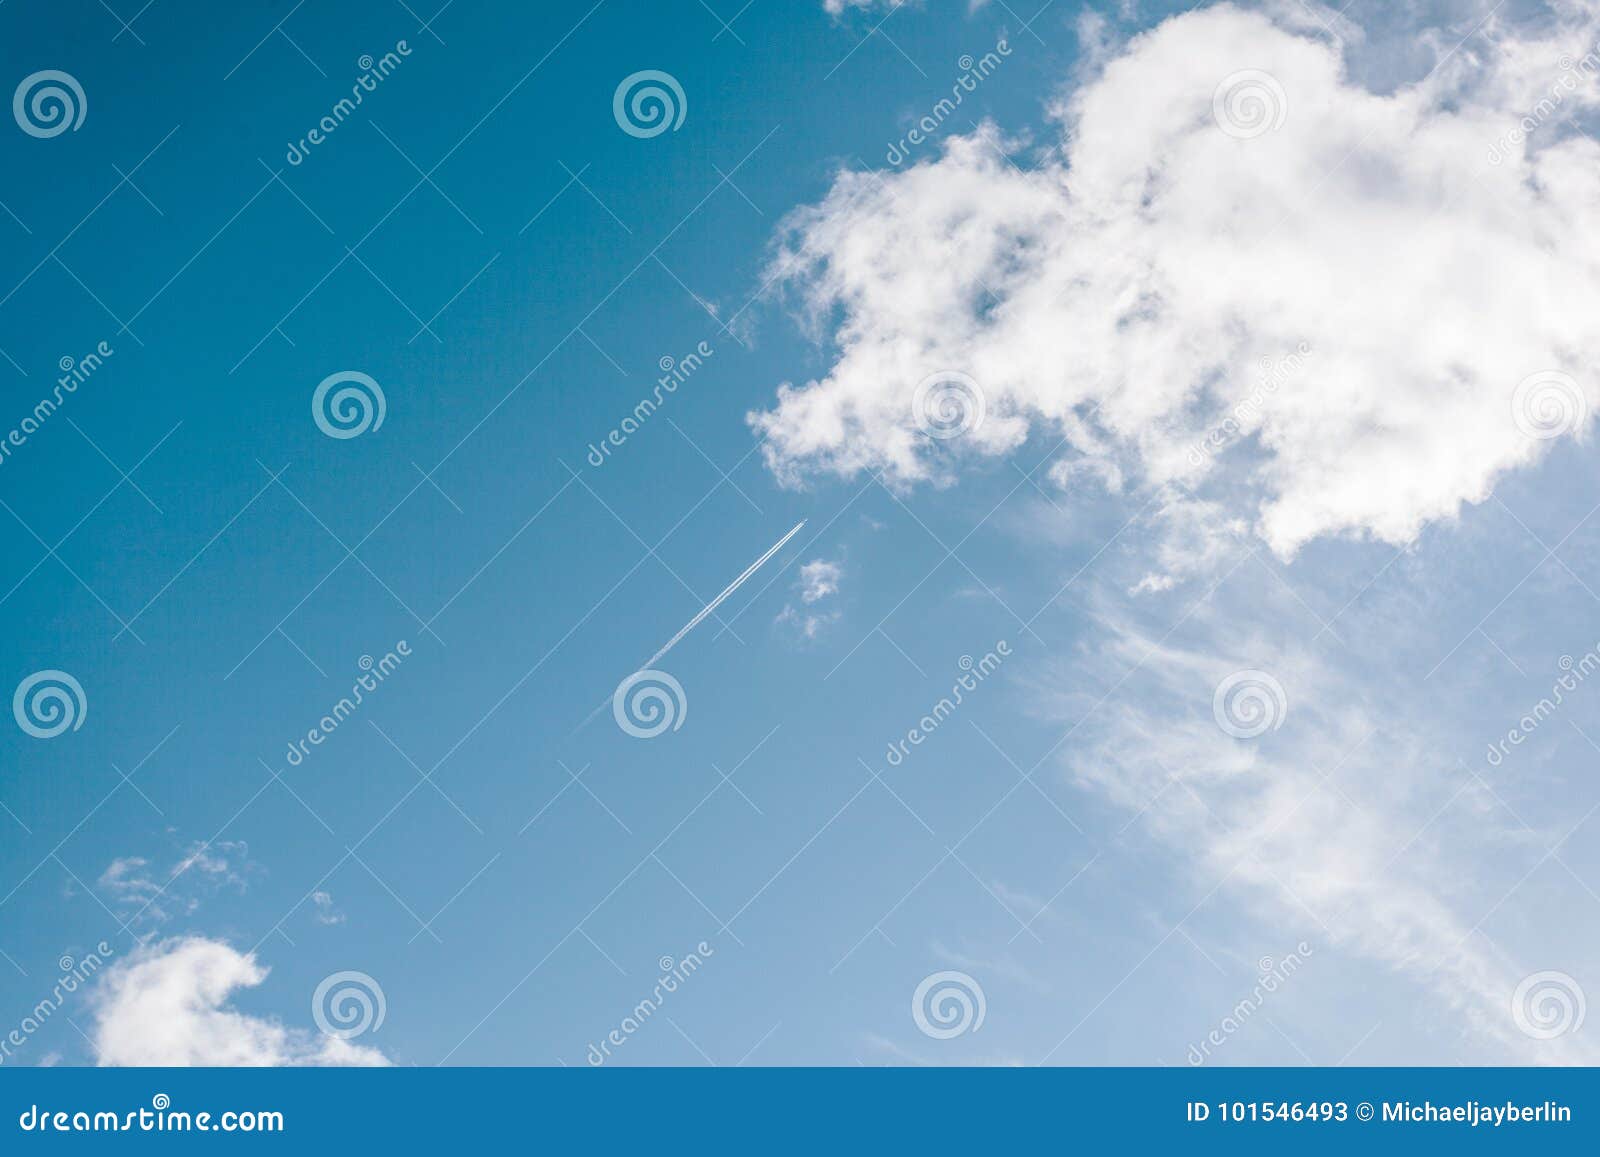 Plane Flighing High Above Clouds on Sunny Day Stock Image - Image of ...